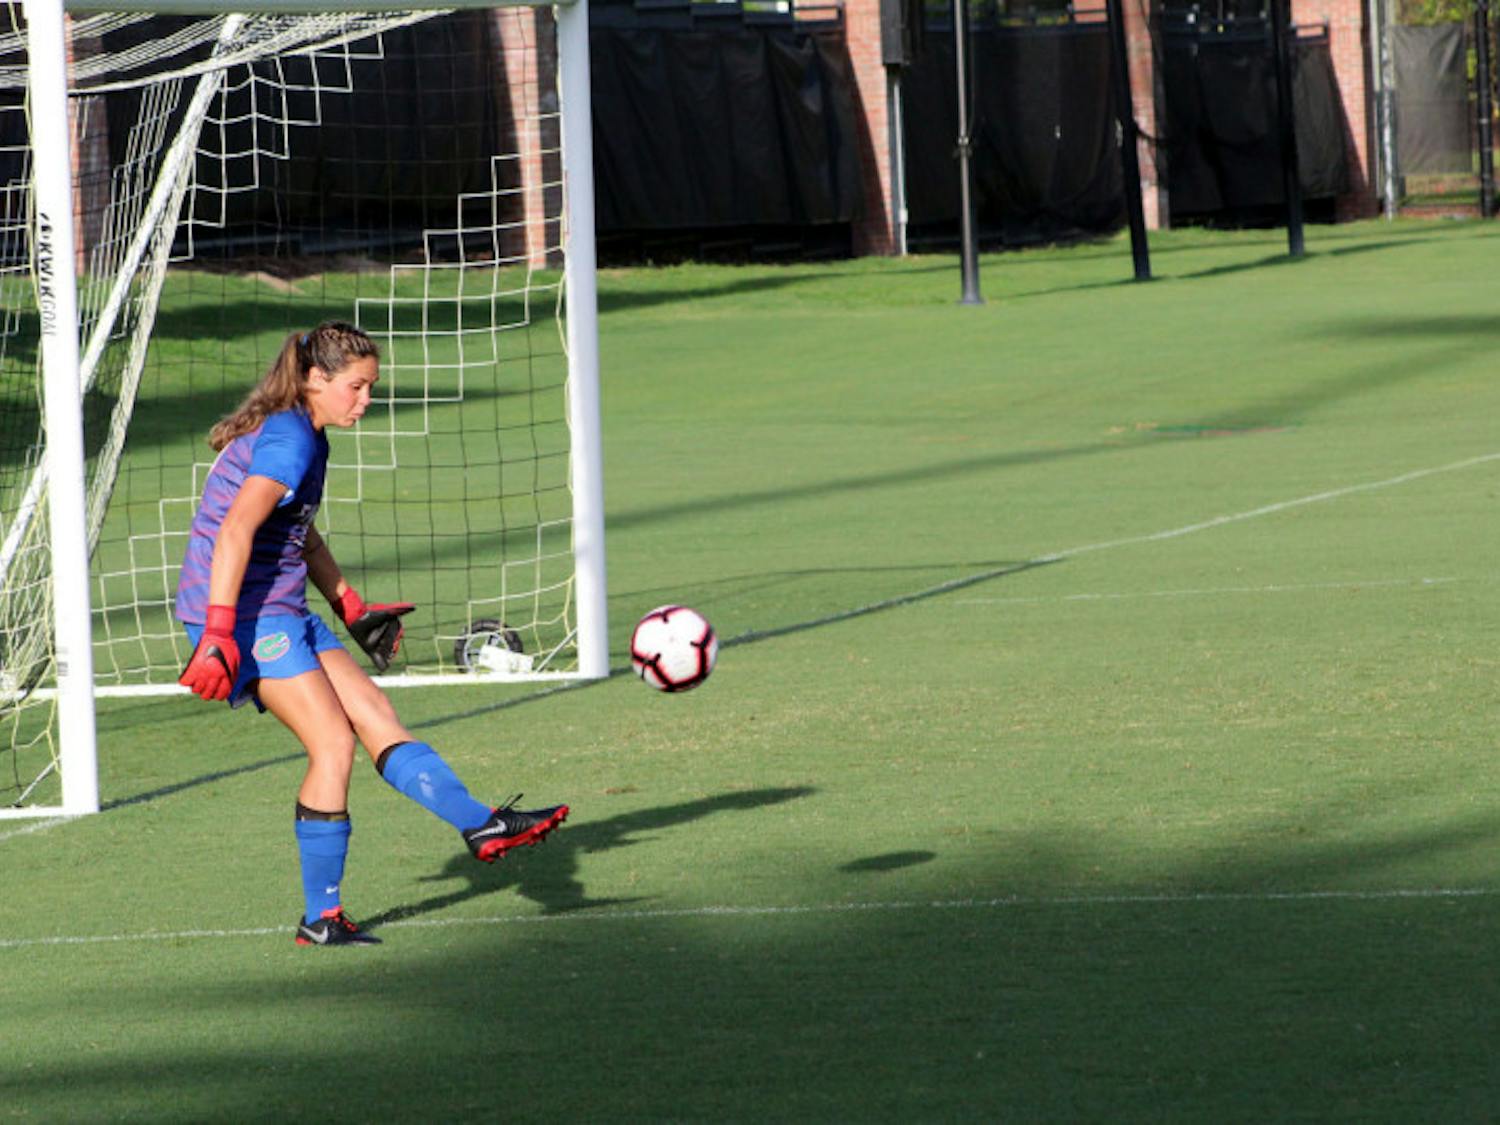 Florida goalkeeper Kaylan Marckese conceded three goals in UF's loss to Southern California Sunday. Marckese hasn't gotten much help from the offense, which has failed to score in four-straight games.&nbsp;